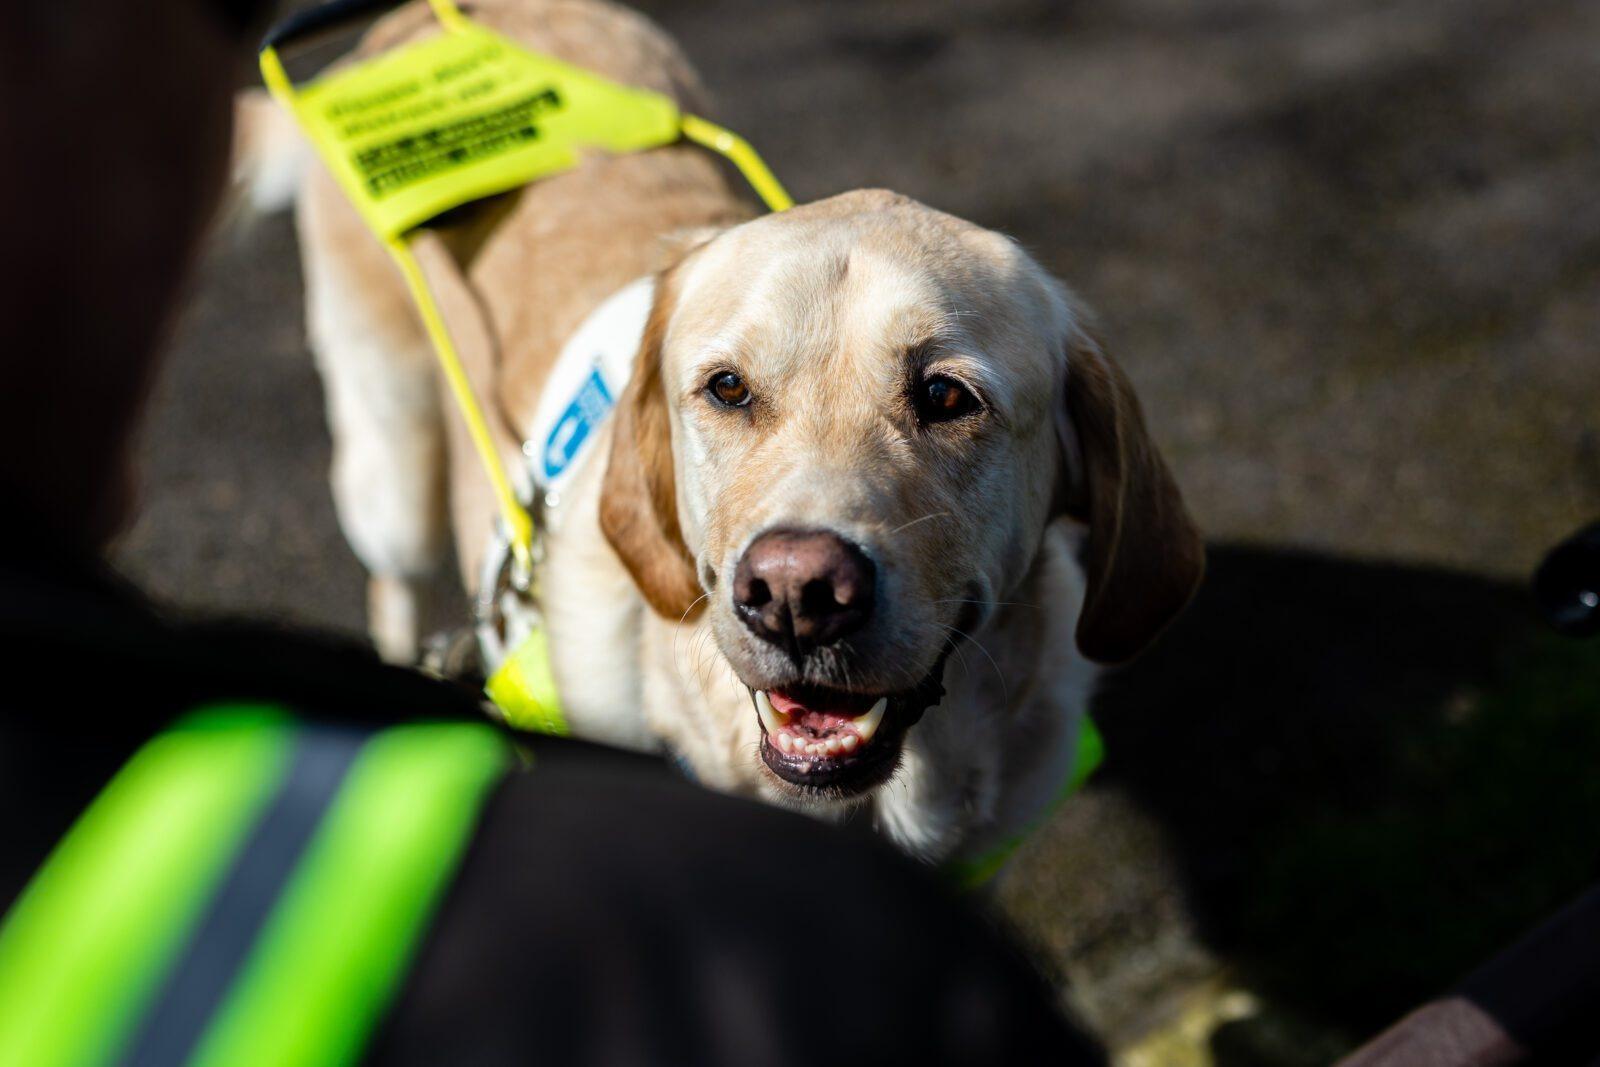 Meet Guide Dogs at the Newlands Shopping Centre this weekend and find out how you can get involved